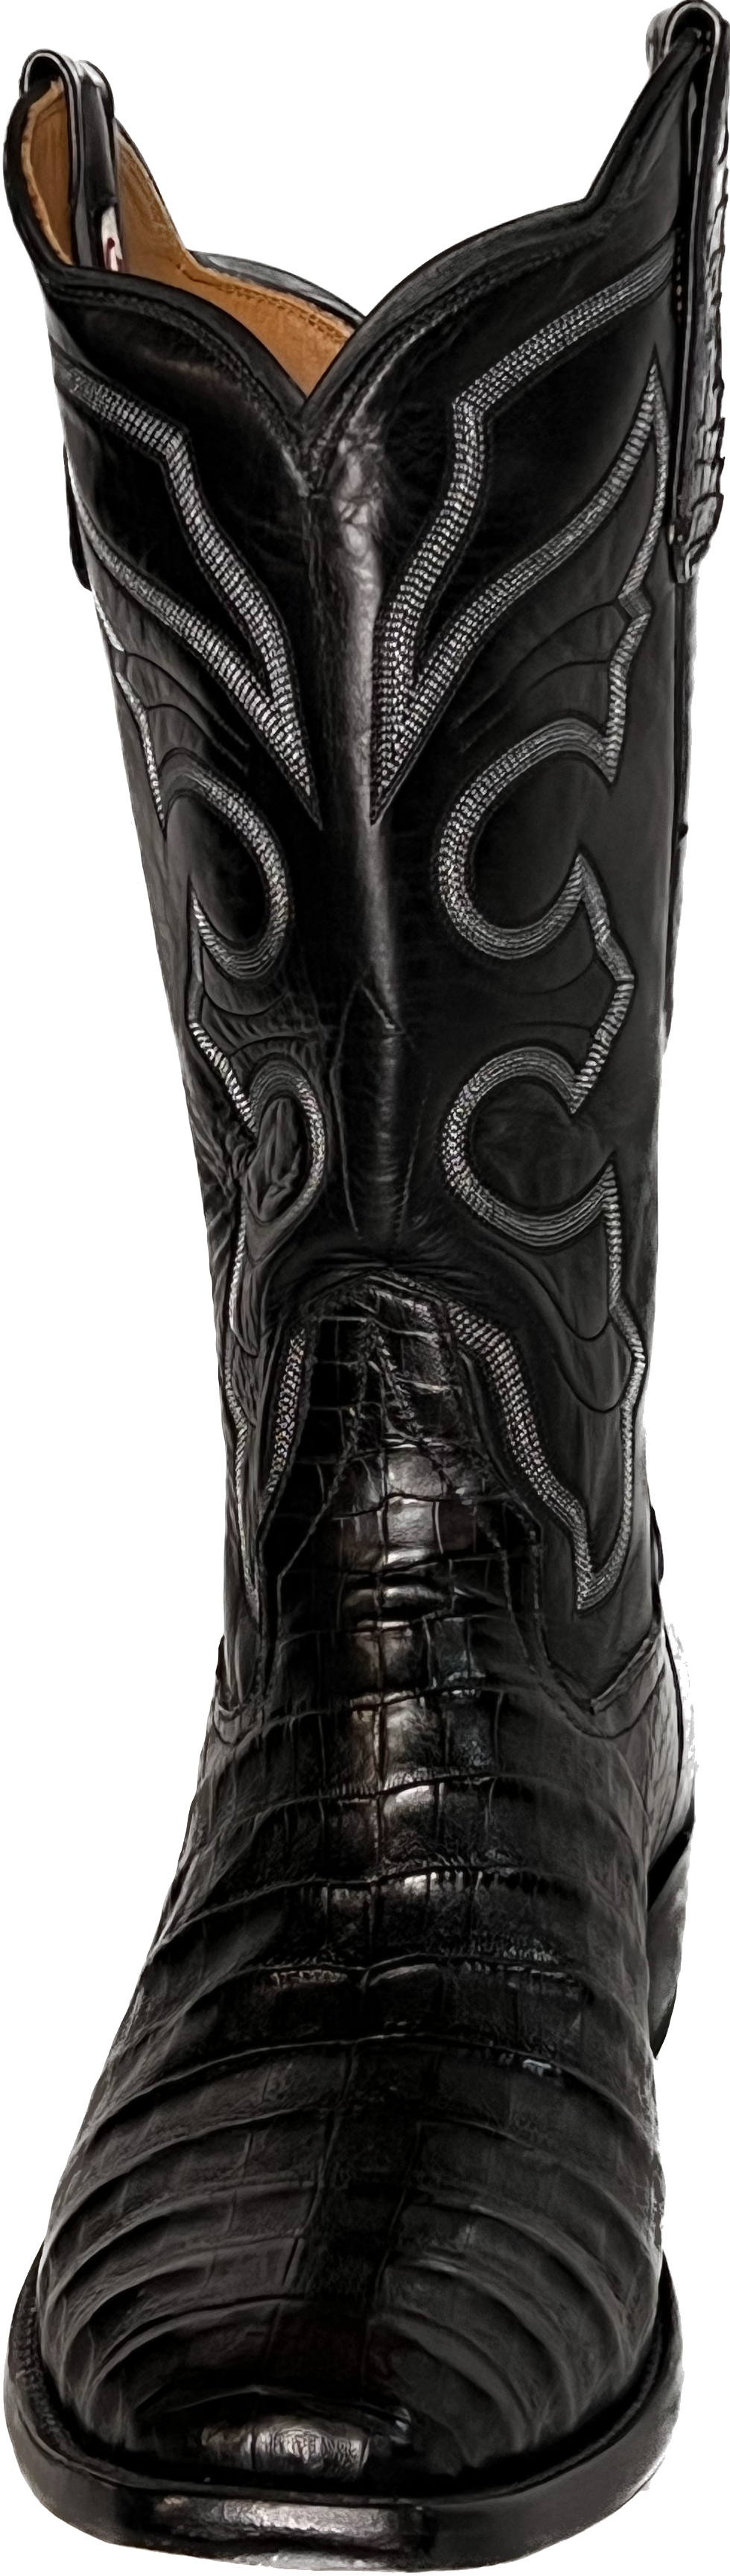 Rios of Mercedes Black Caiman Belly Boots